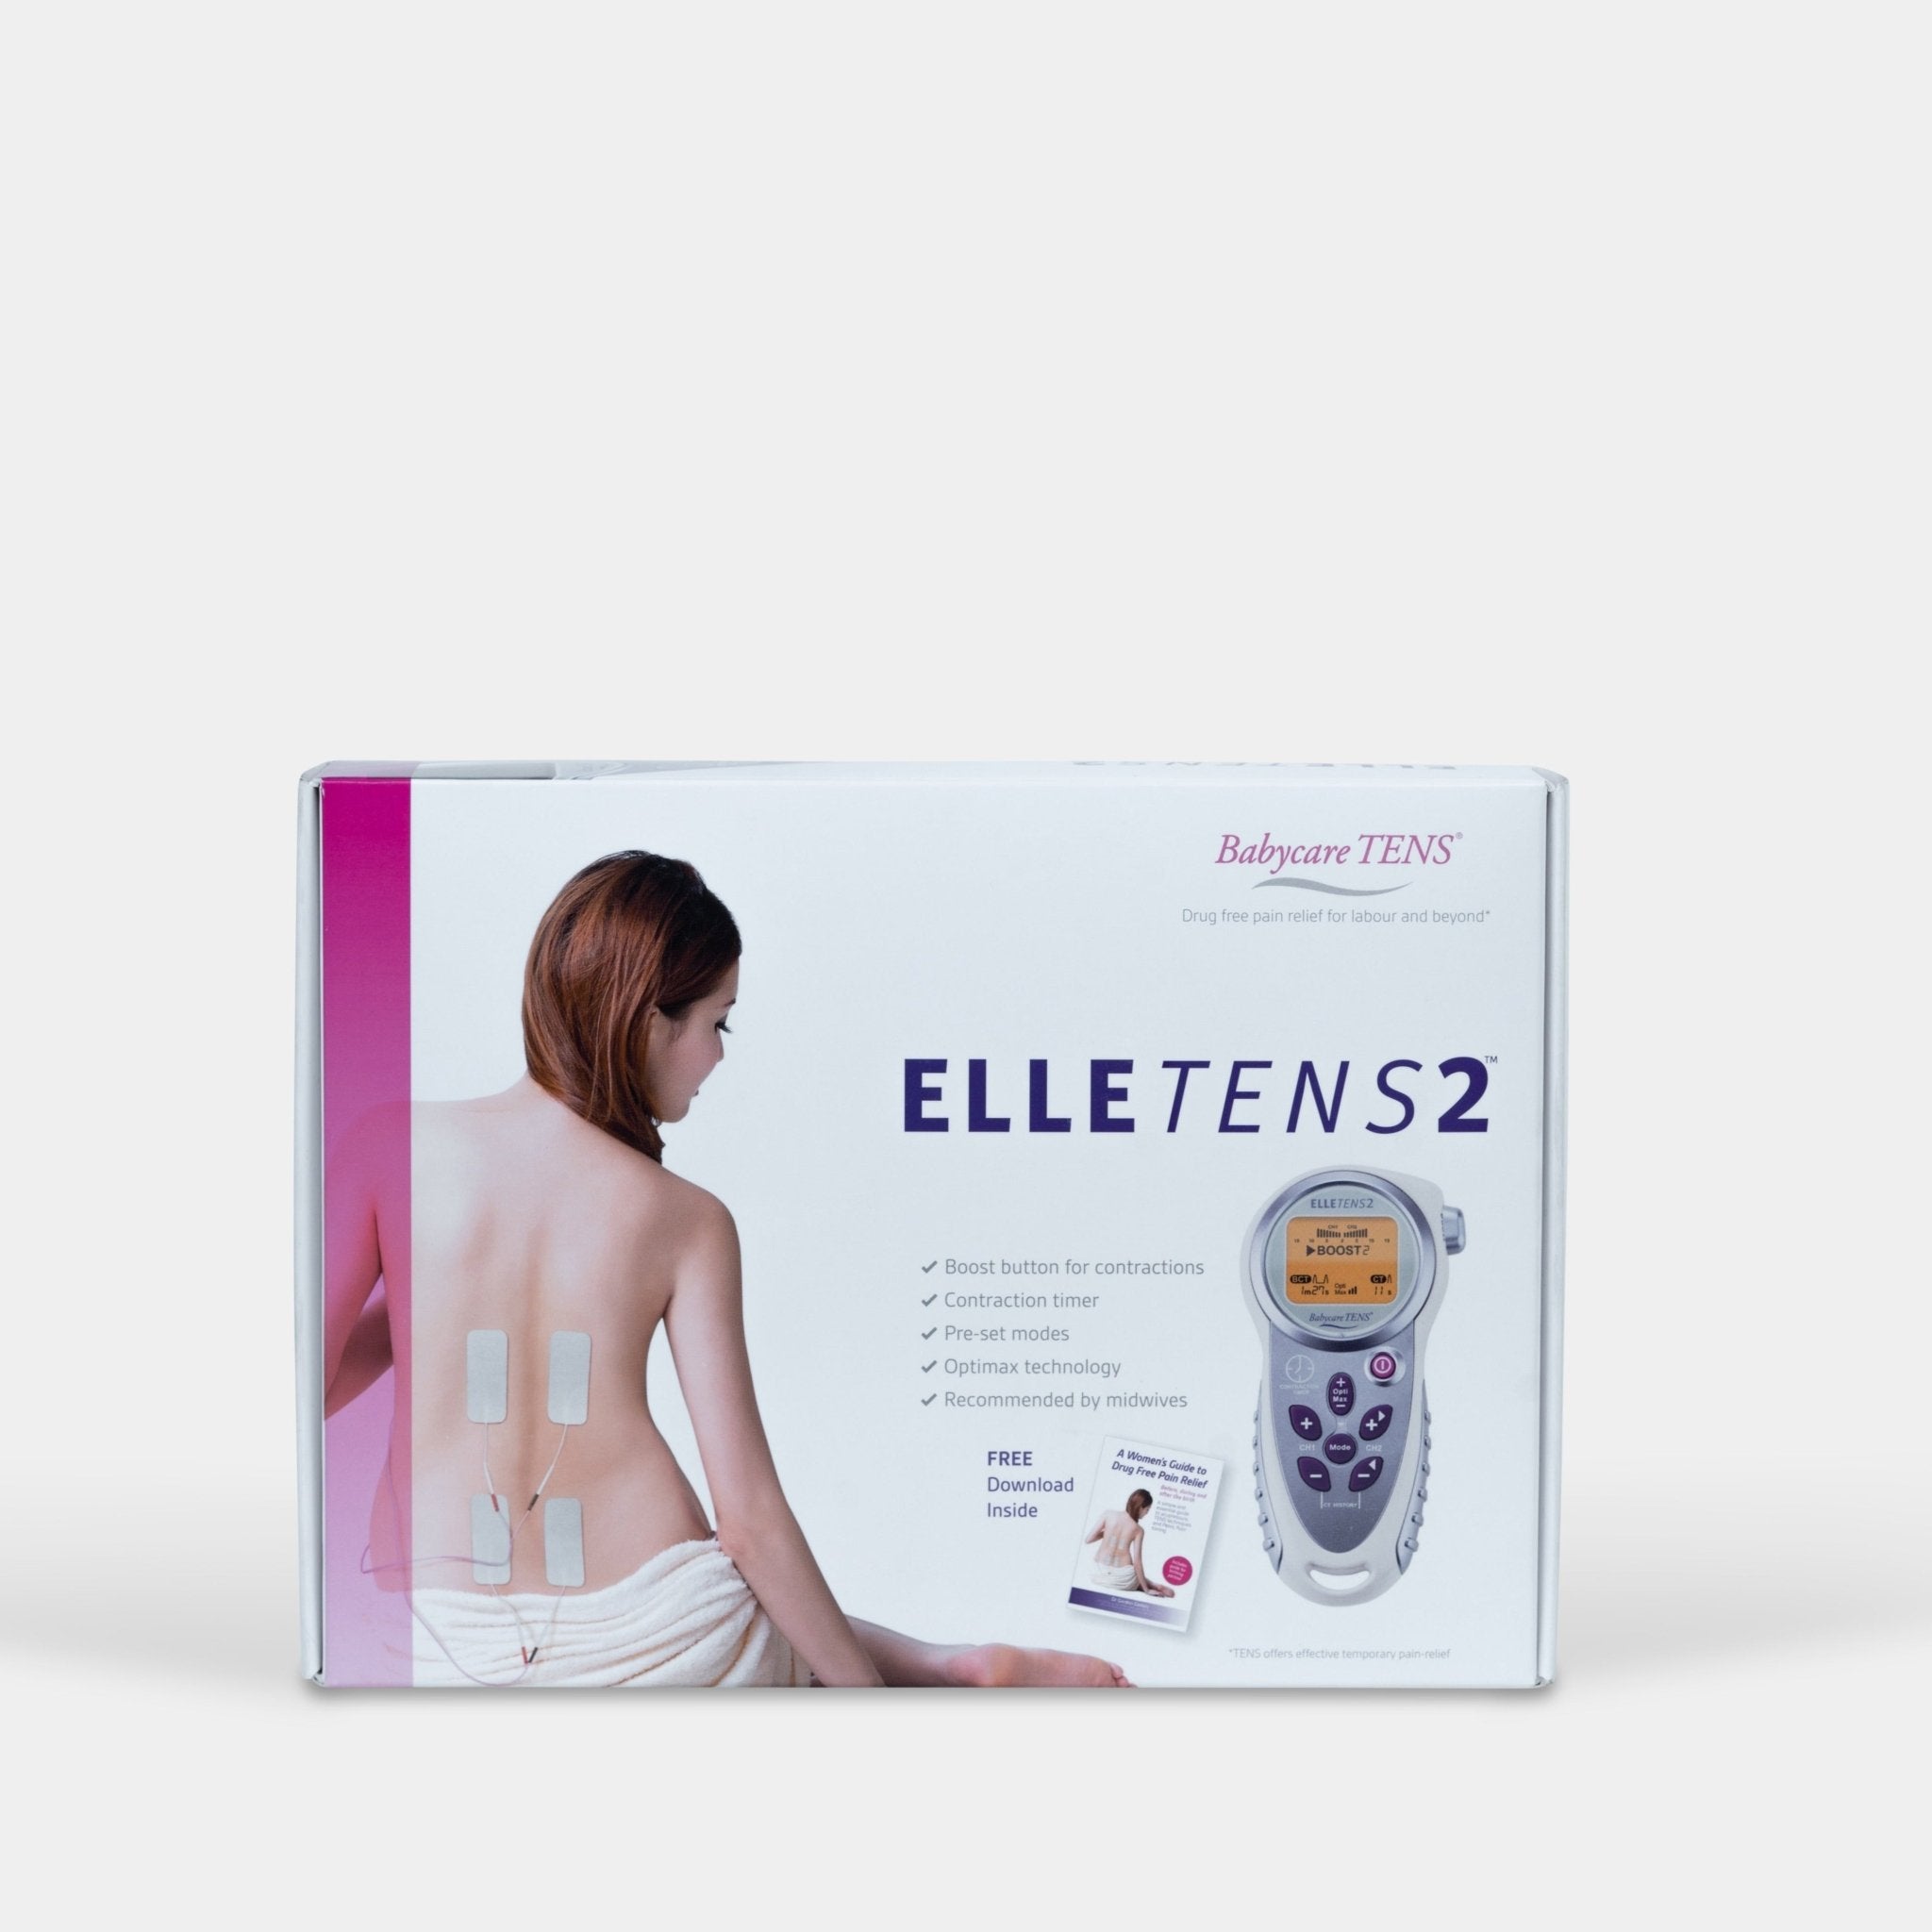 Elle TENS 2 - The Birth Store-Babycare TENS